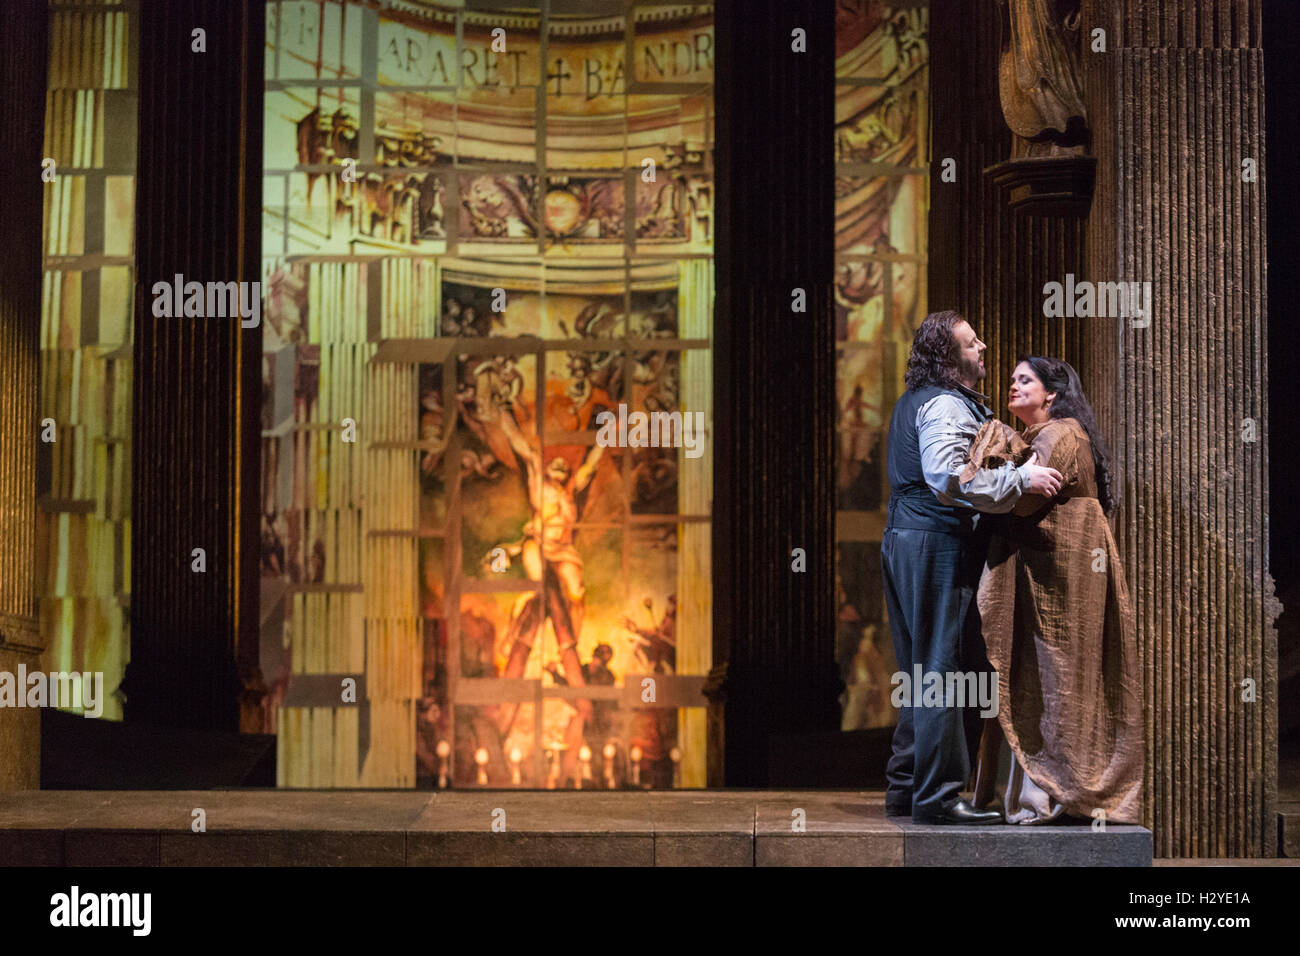 London, UK. 1 October 2016. Keri Alkema as Tosca and Gwyn Hughes Jones as Cavaradossi. Dress rehearsal of the Giacomo Pucccini opera Tosca with Keri Alkema as Floria Tosca, Gwyn Hughes Jones as Mario Cavaradossi and Craig Colclough as Baron Scarpia. Donna Stirrup is the revival director of Catherine Malfitano's original ENO production of Tosca, set design by Frank Philipp Schlössman. 13 performances at the London Coliseum from 3 October to 3 December 2016. Stock Photo